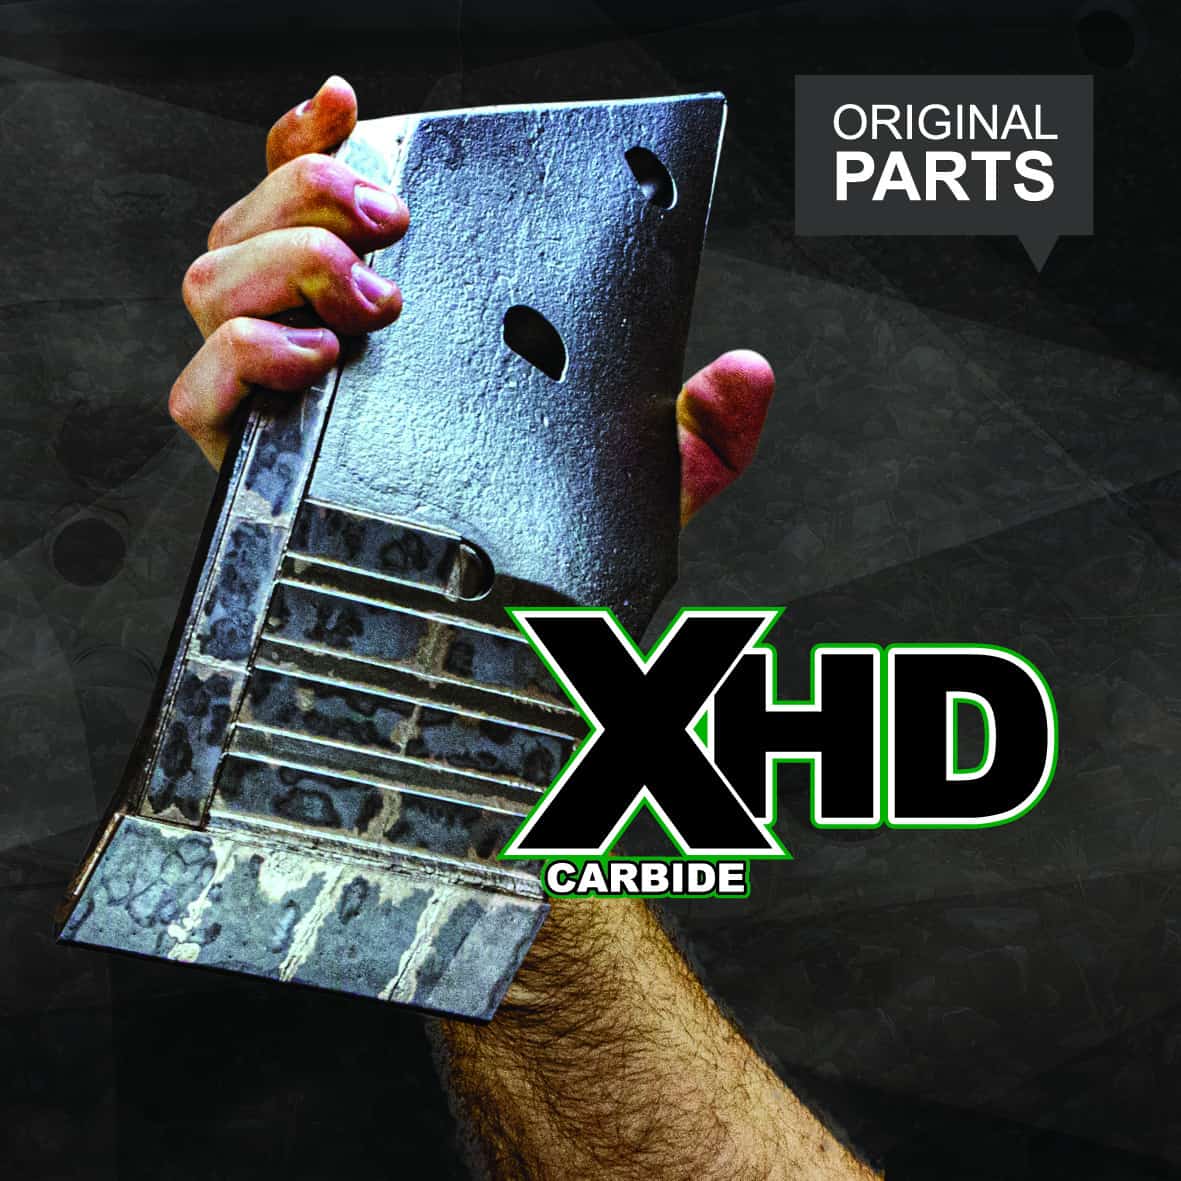 Original parts now with XHD treatment